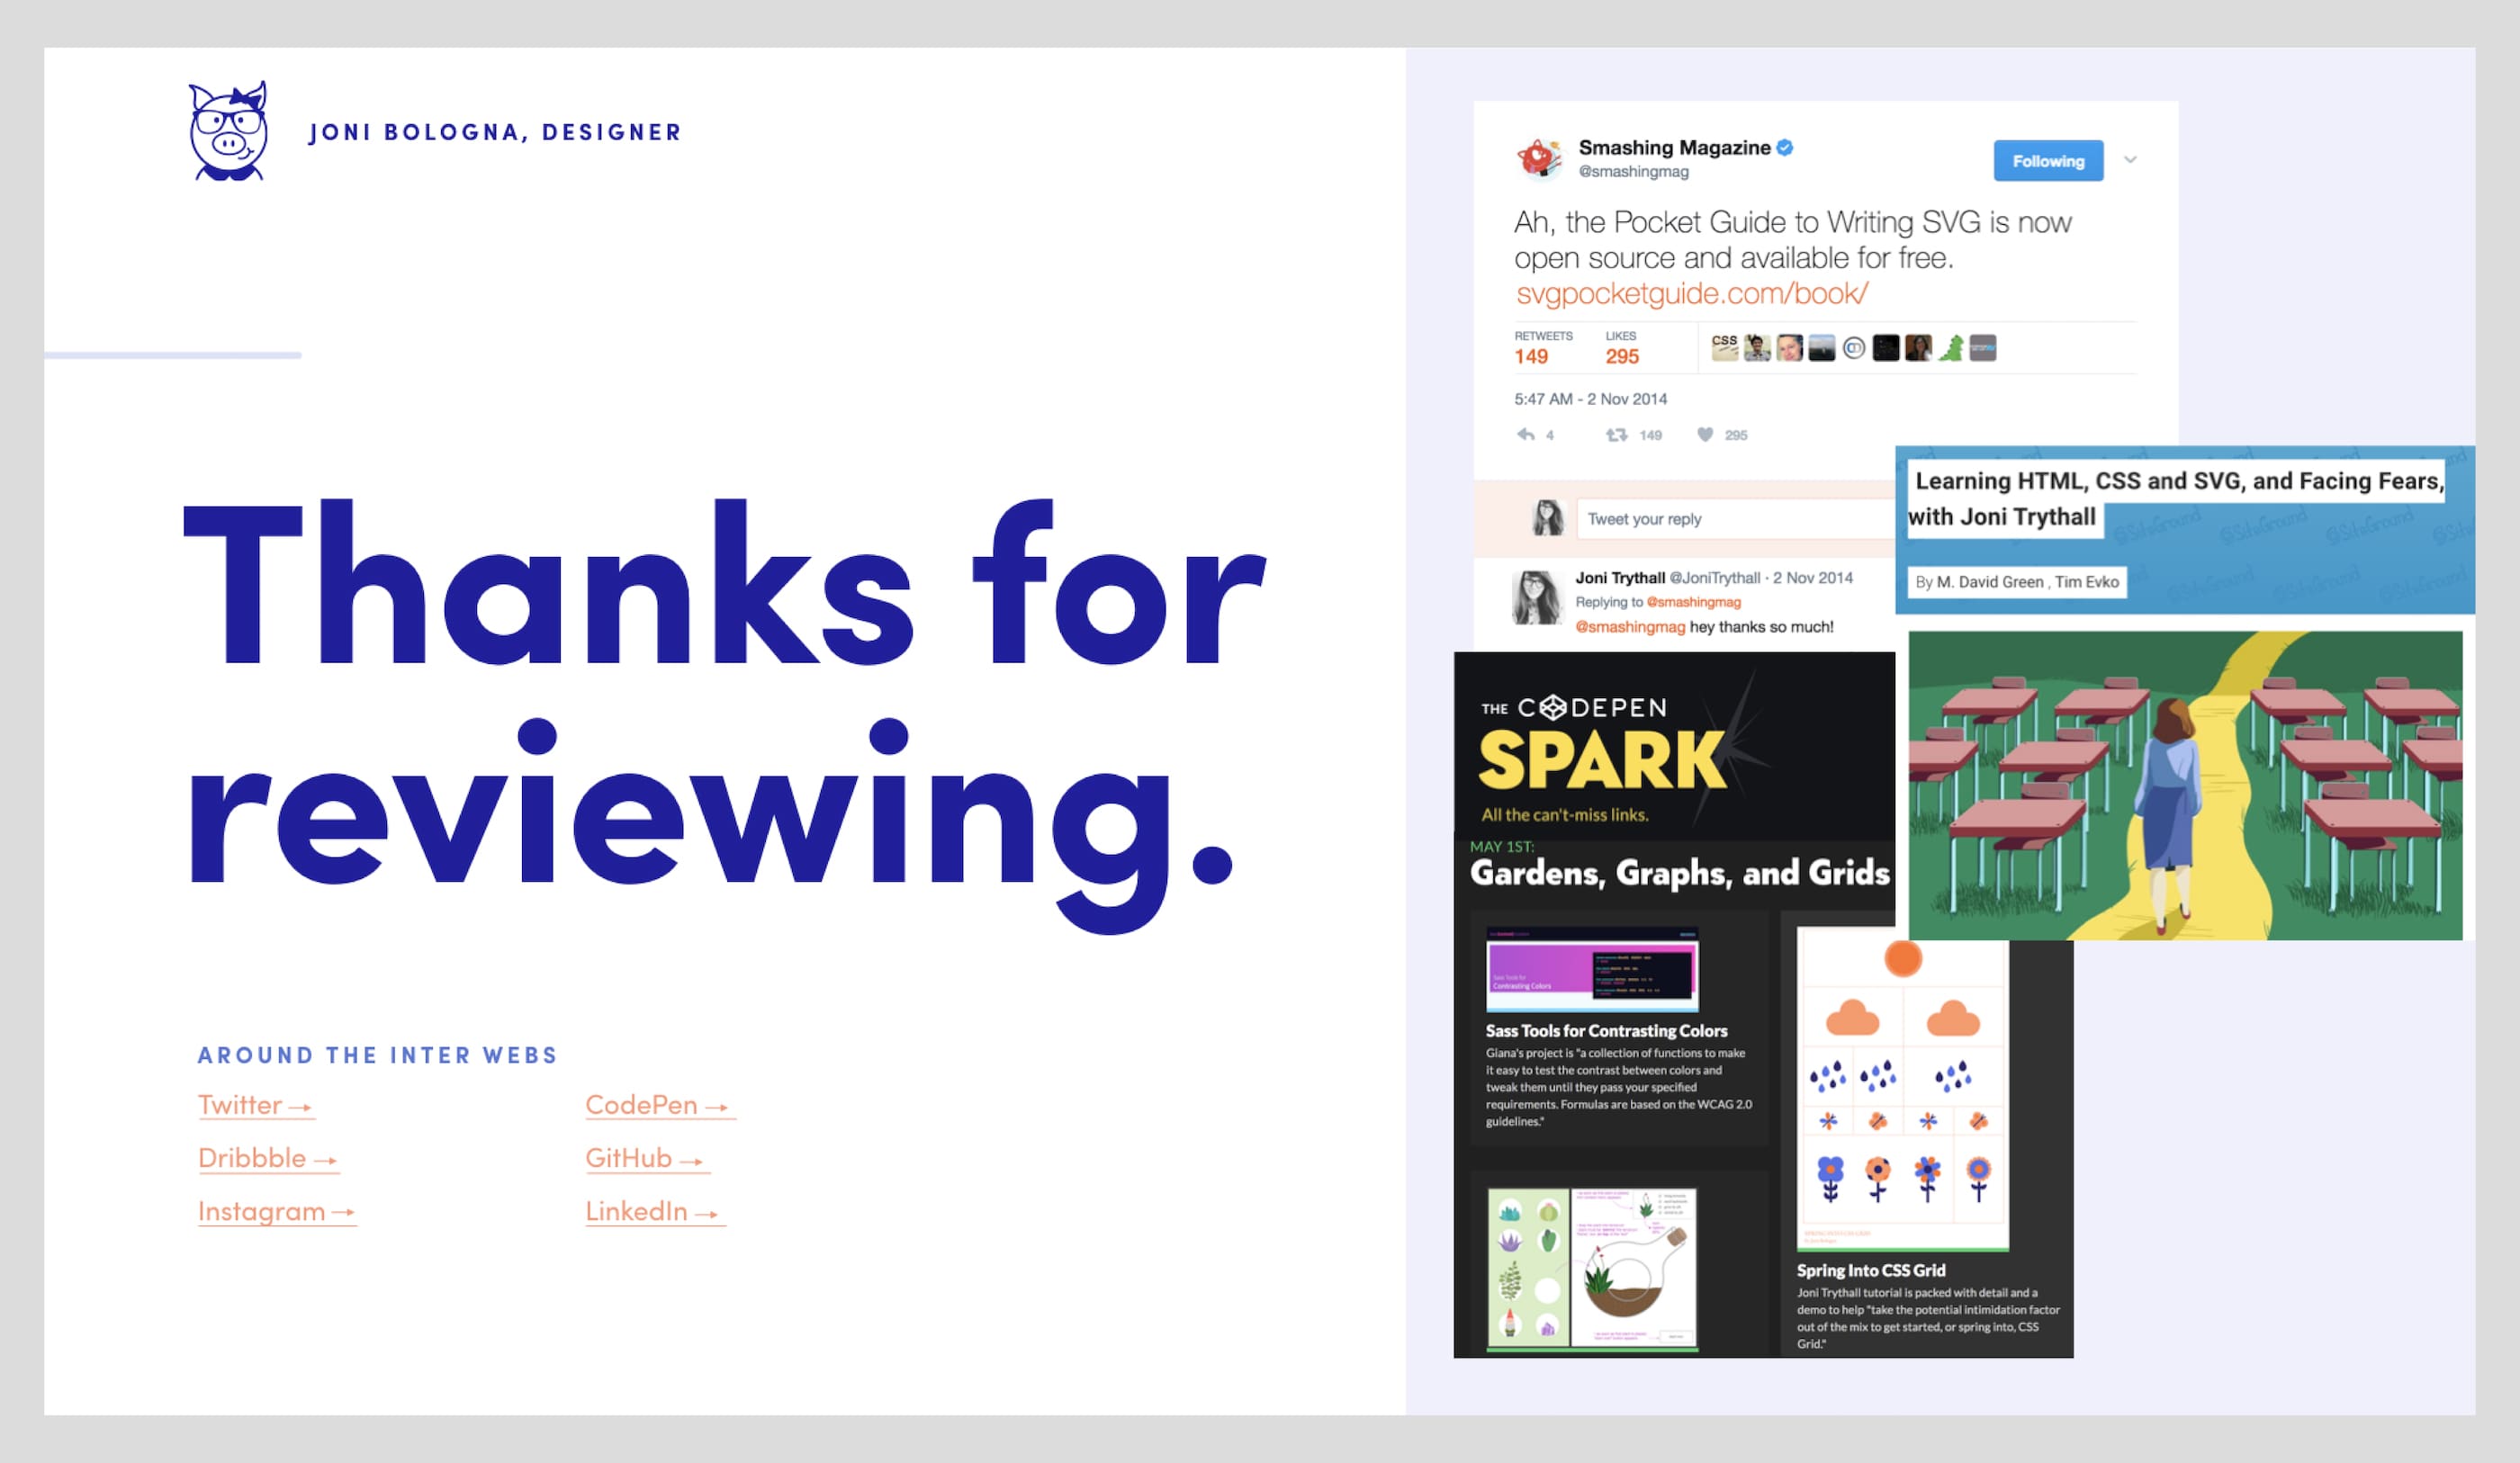 Example of a final "Thank you" proposal page with social media links and media mentions